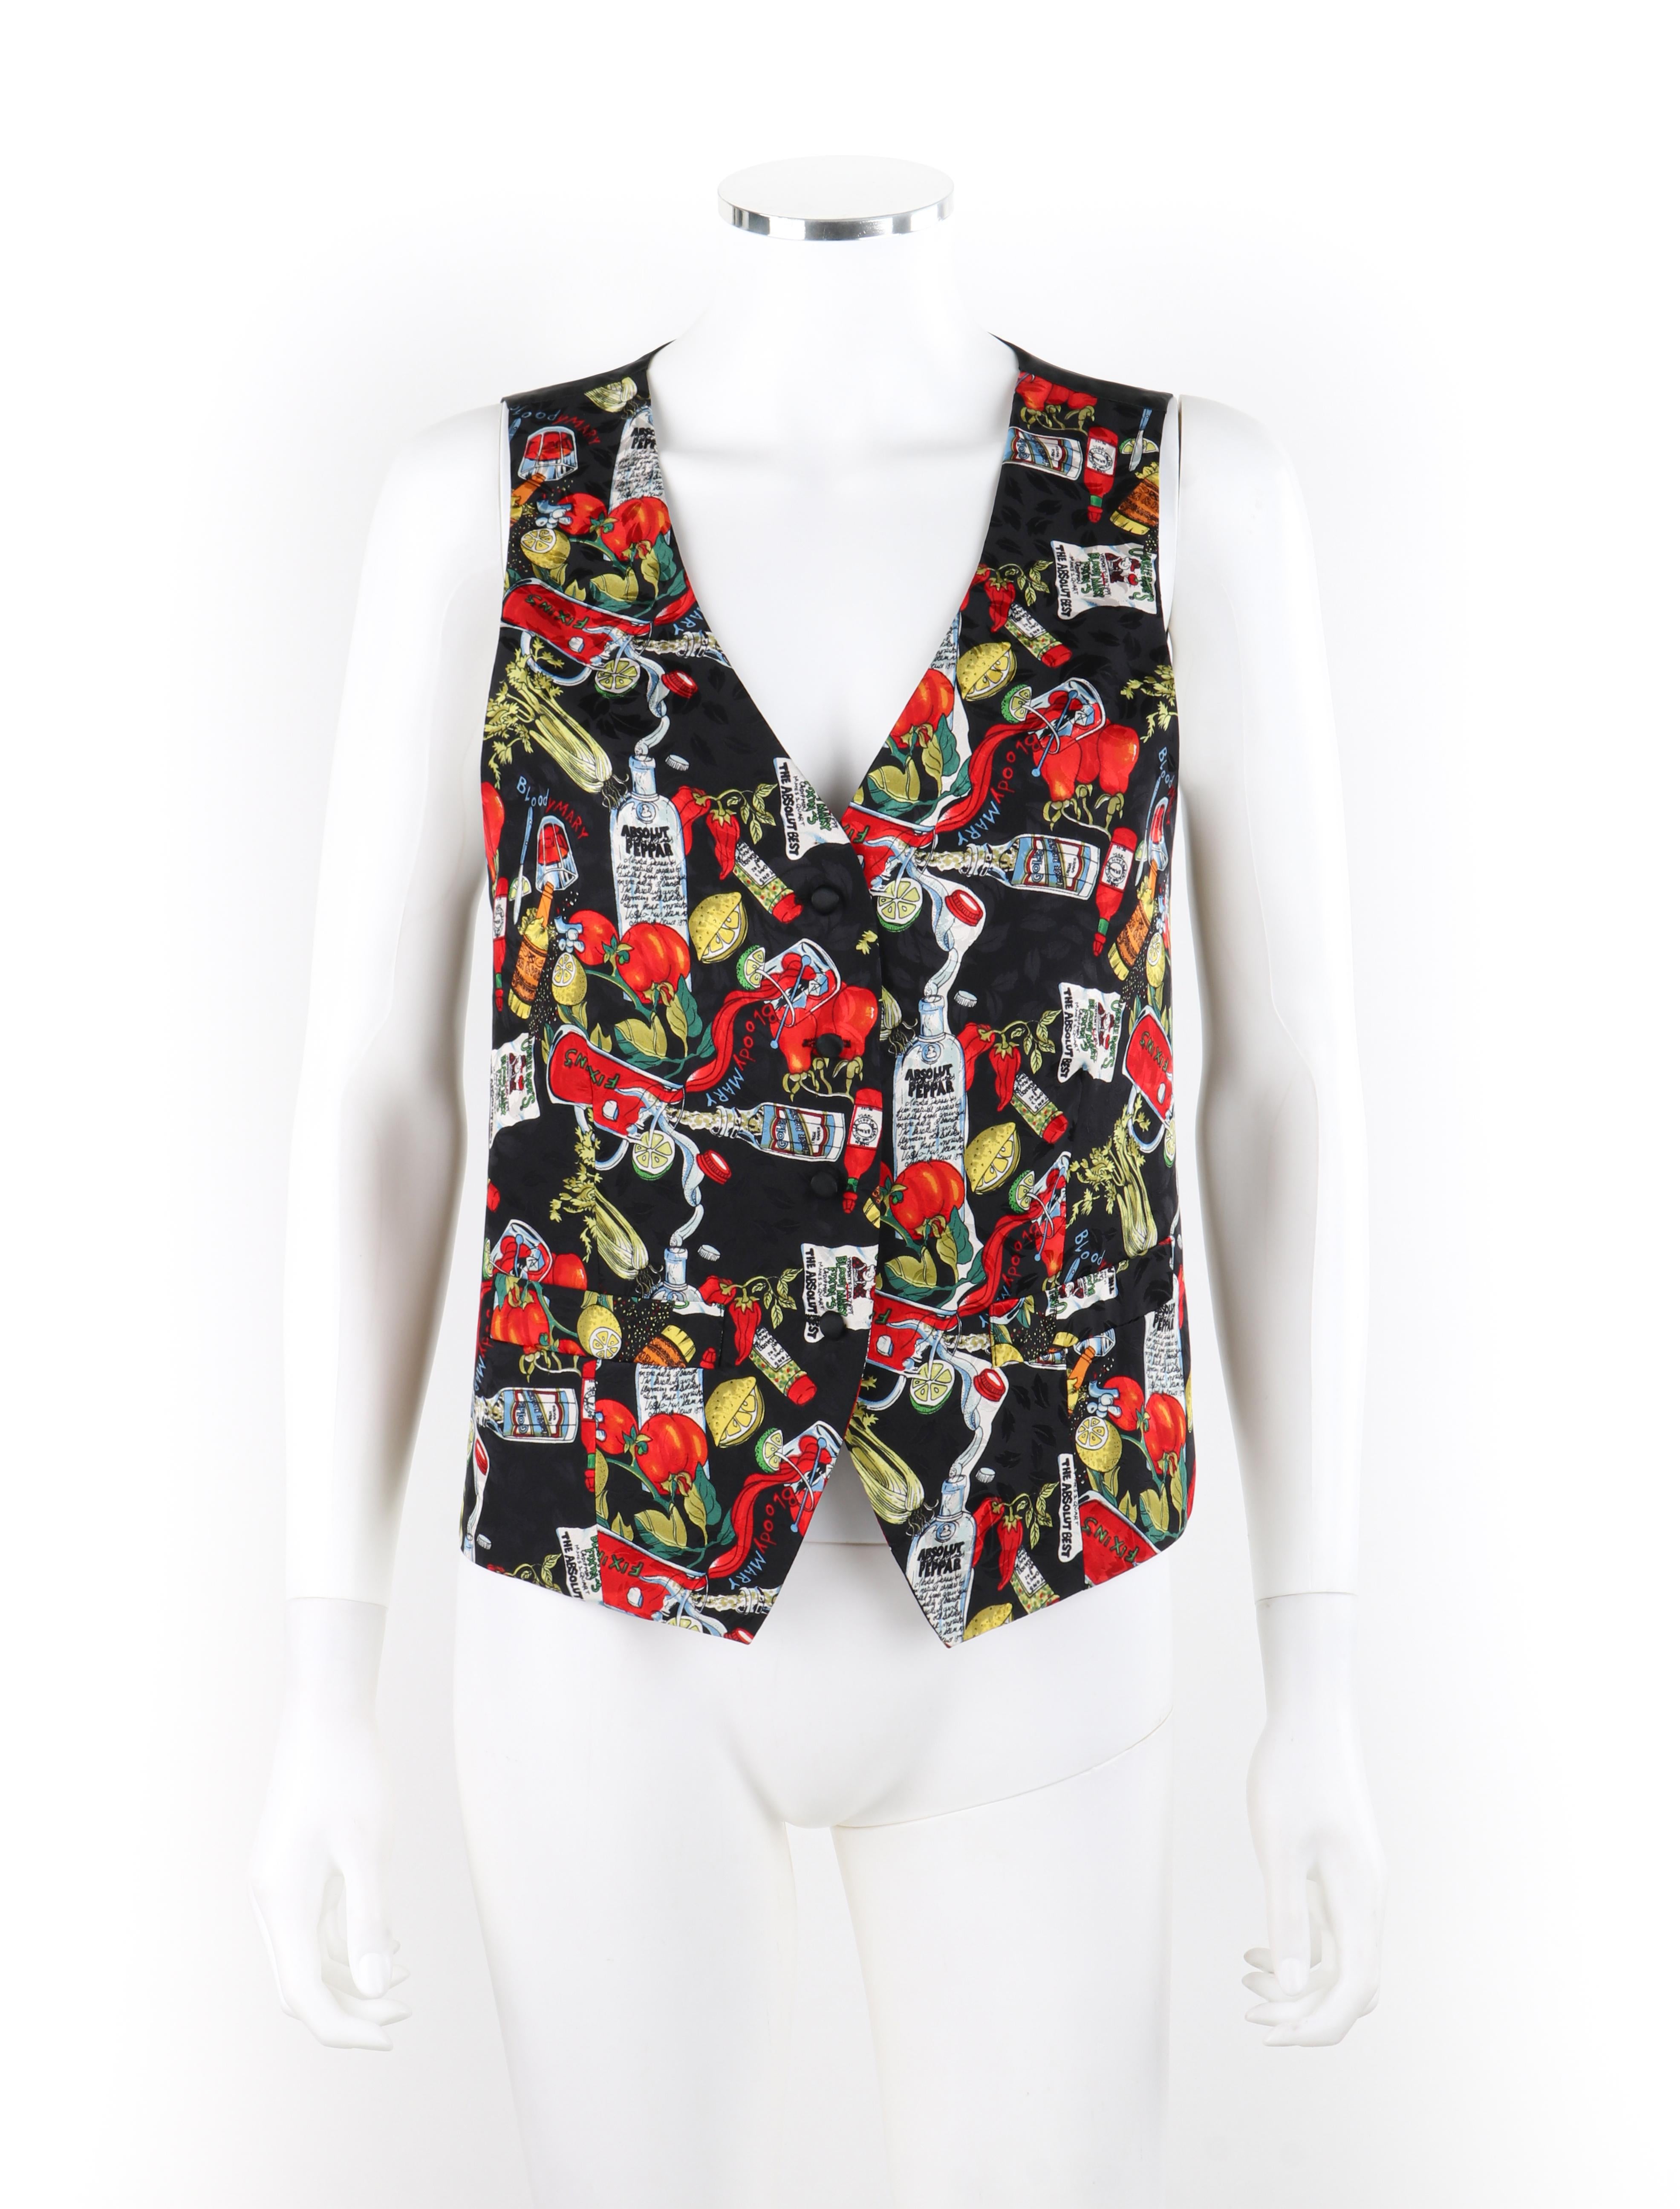 Brand / Manufacturer: Nicole Miller
Collection: 1992
Designer: Nicole Miller
Style: Nicole Miller
Color(s): Shades of black, white, red, green, yellow, orange, blue
Lined: Yes
Marked Fabric Content: 